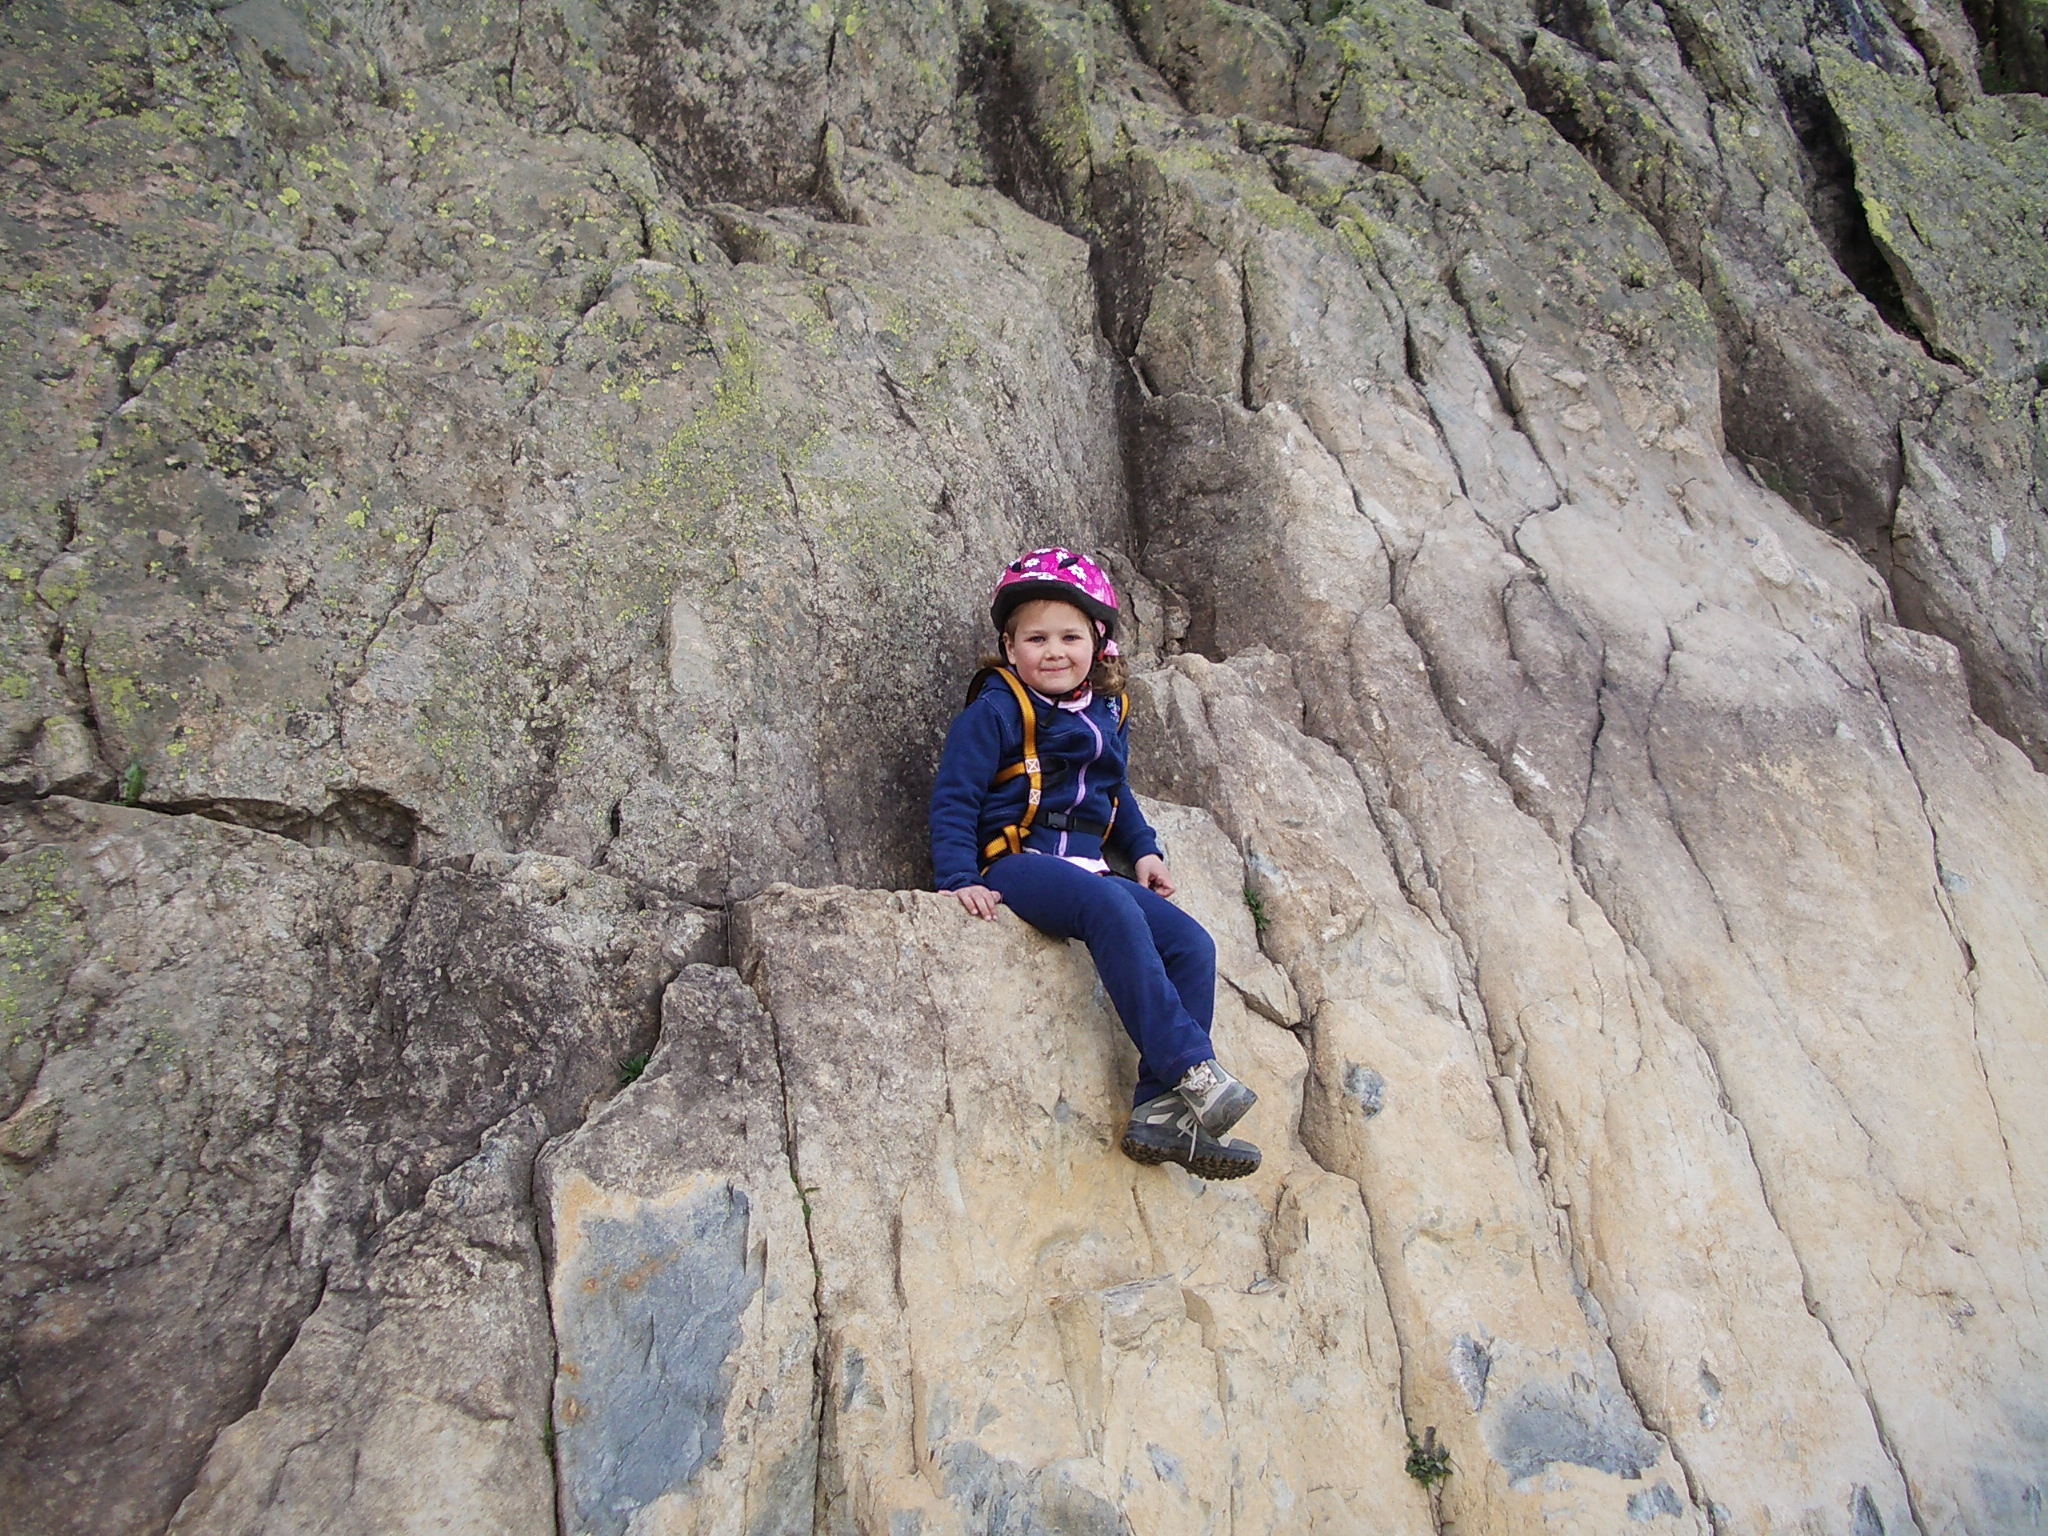 Climbing supervision with a mountain guide